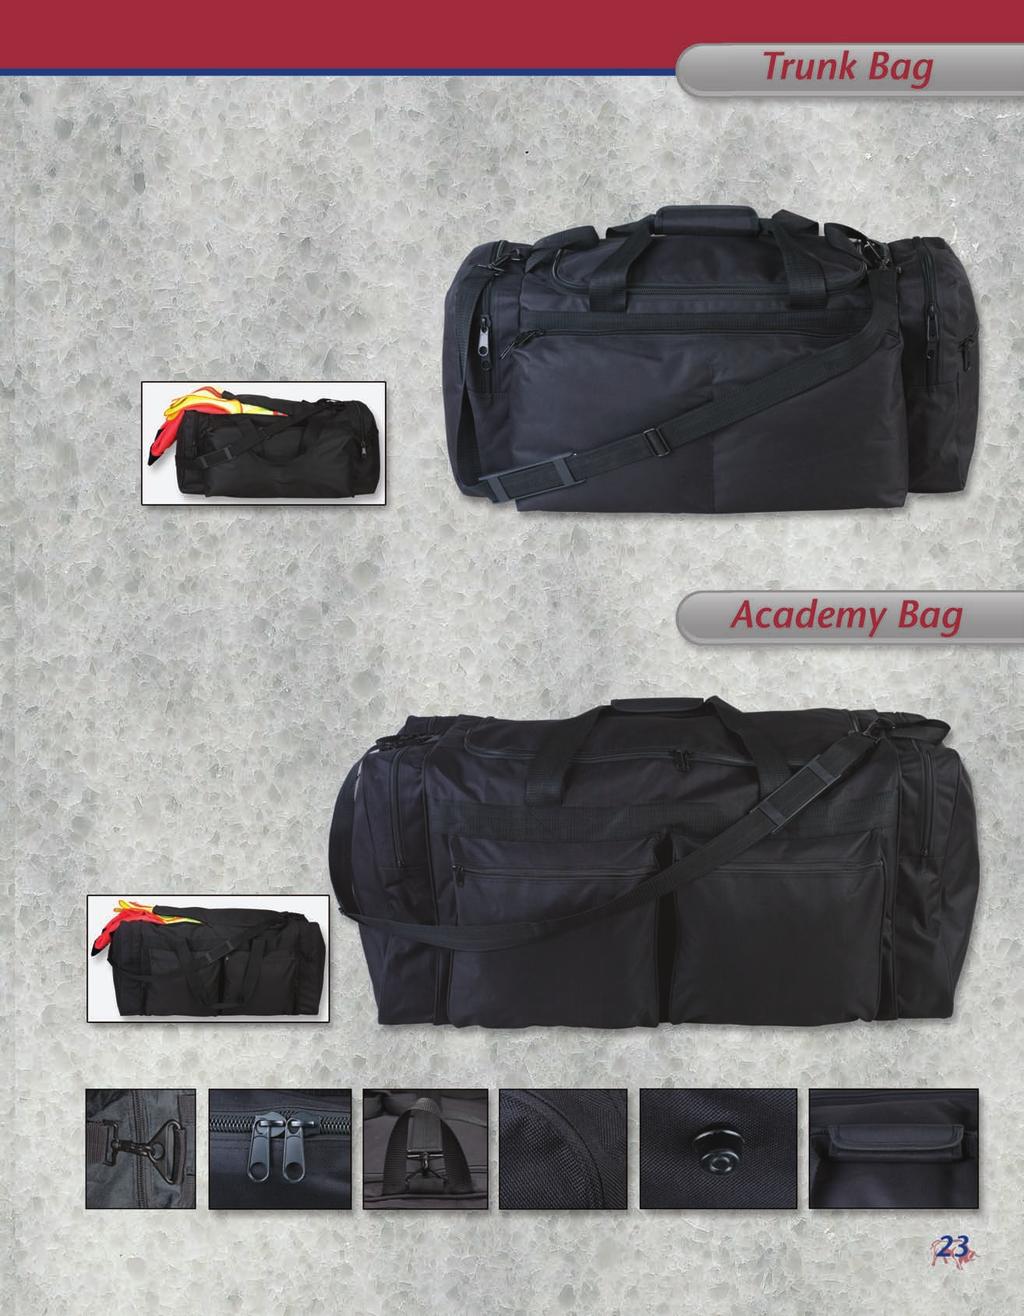 90800 Great to carry your extra gear in the trunk. Room for most of your gear. Made of 600 D polyester which is easy to clean. The main compartment is 21" long x 11" wide x 12" tall.